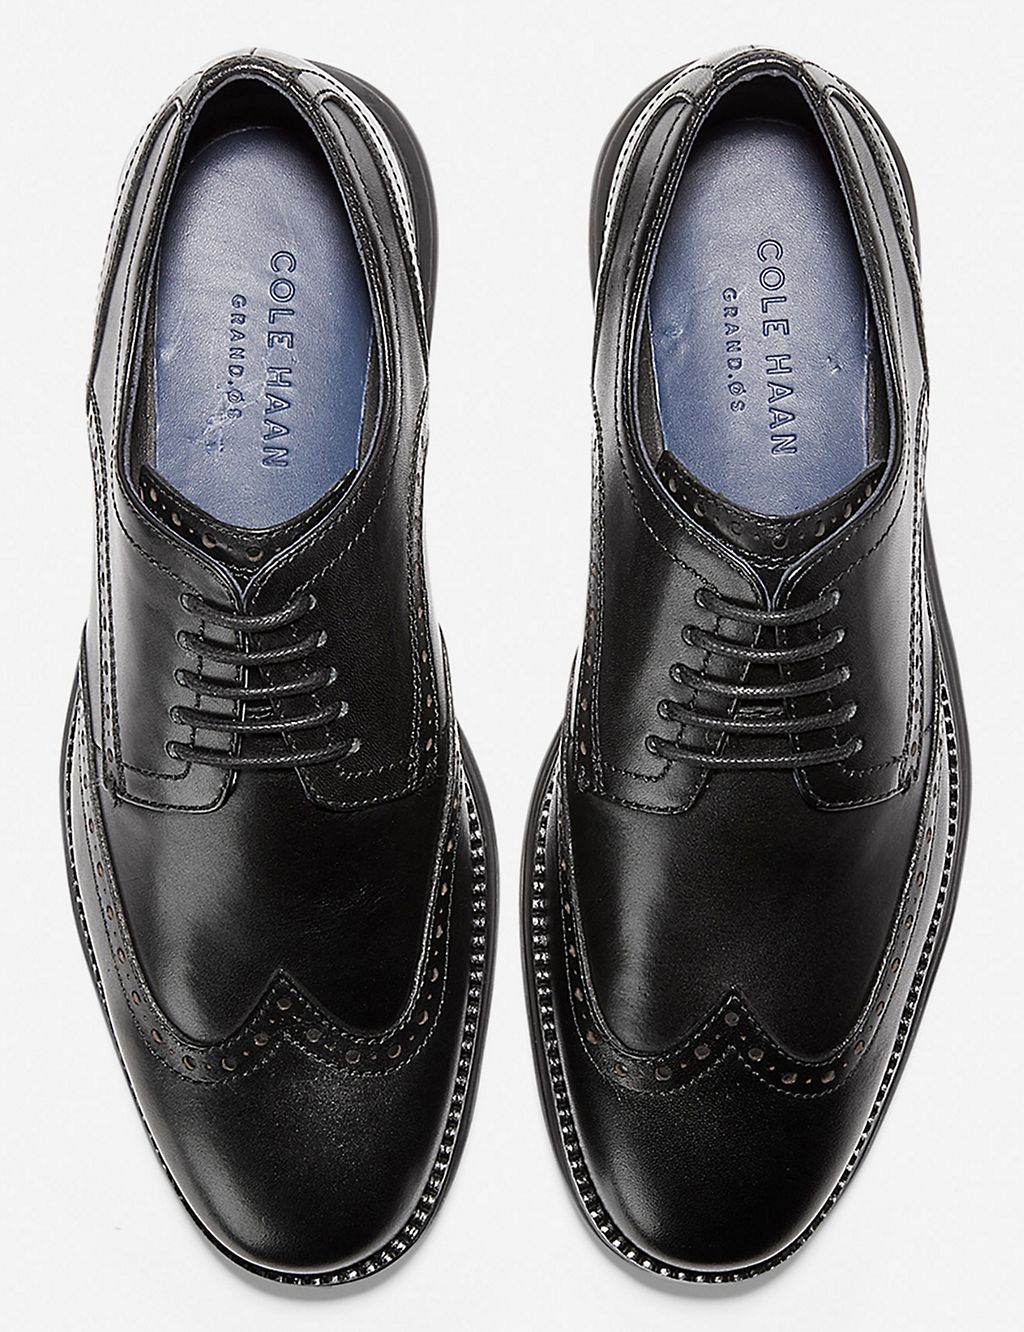 Originalgrand Wide Fit Leather Oxford Shoes | Cole Haan | M&S